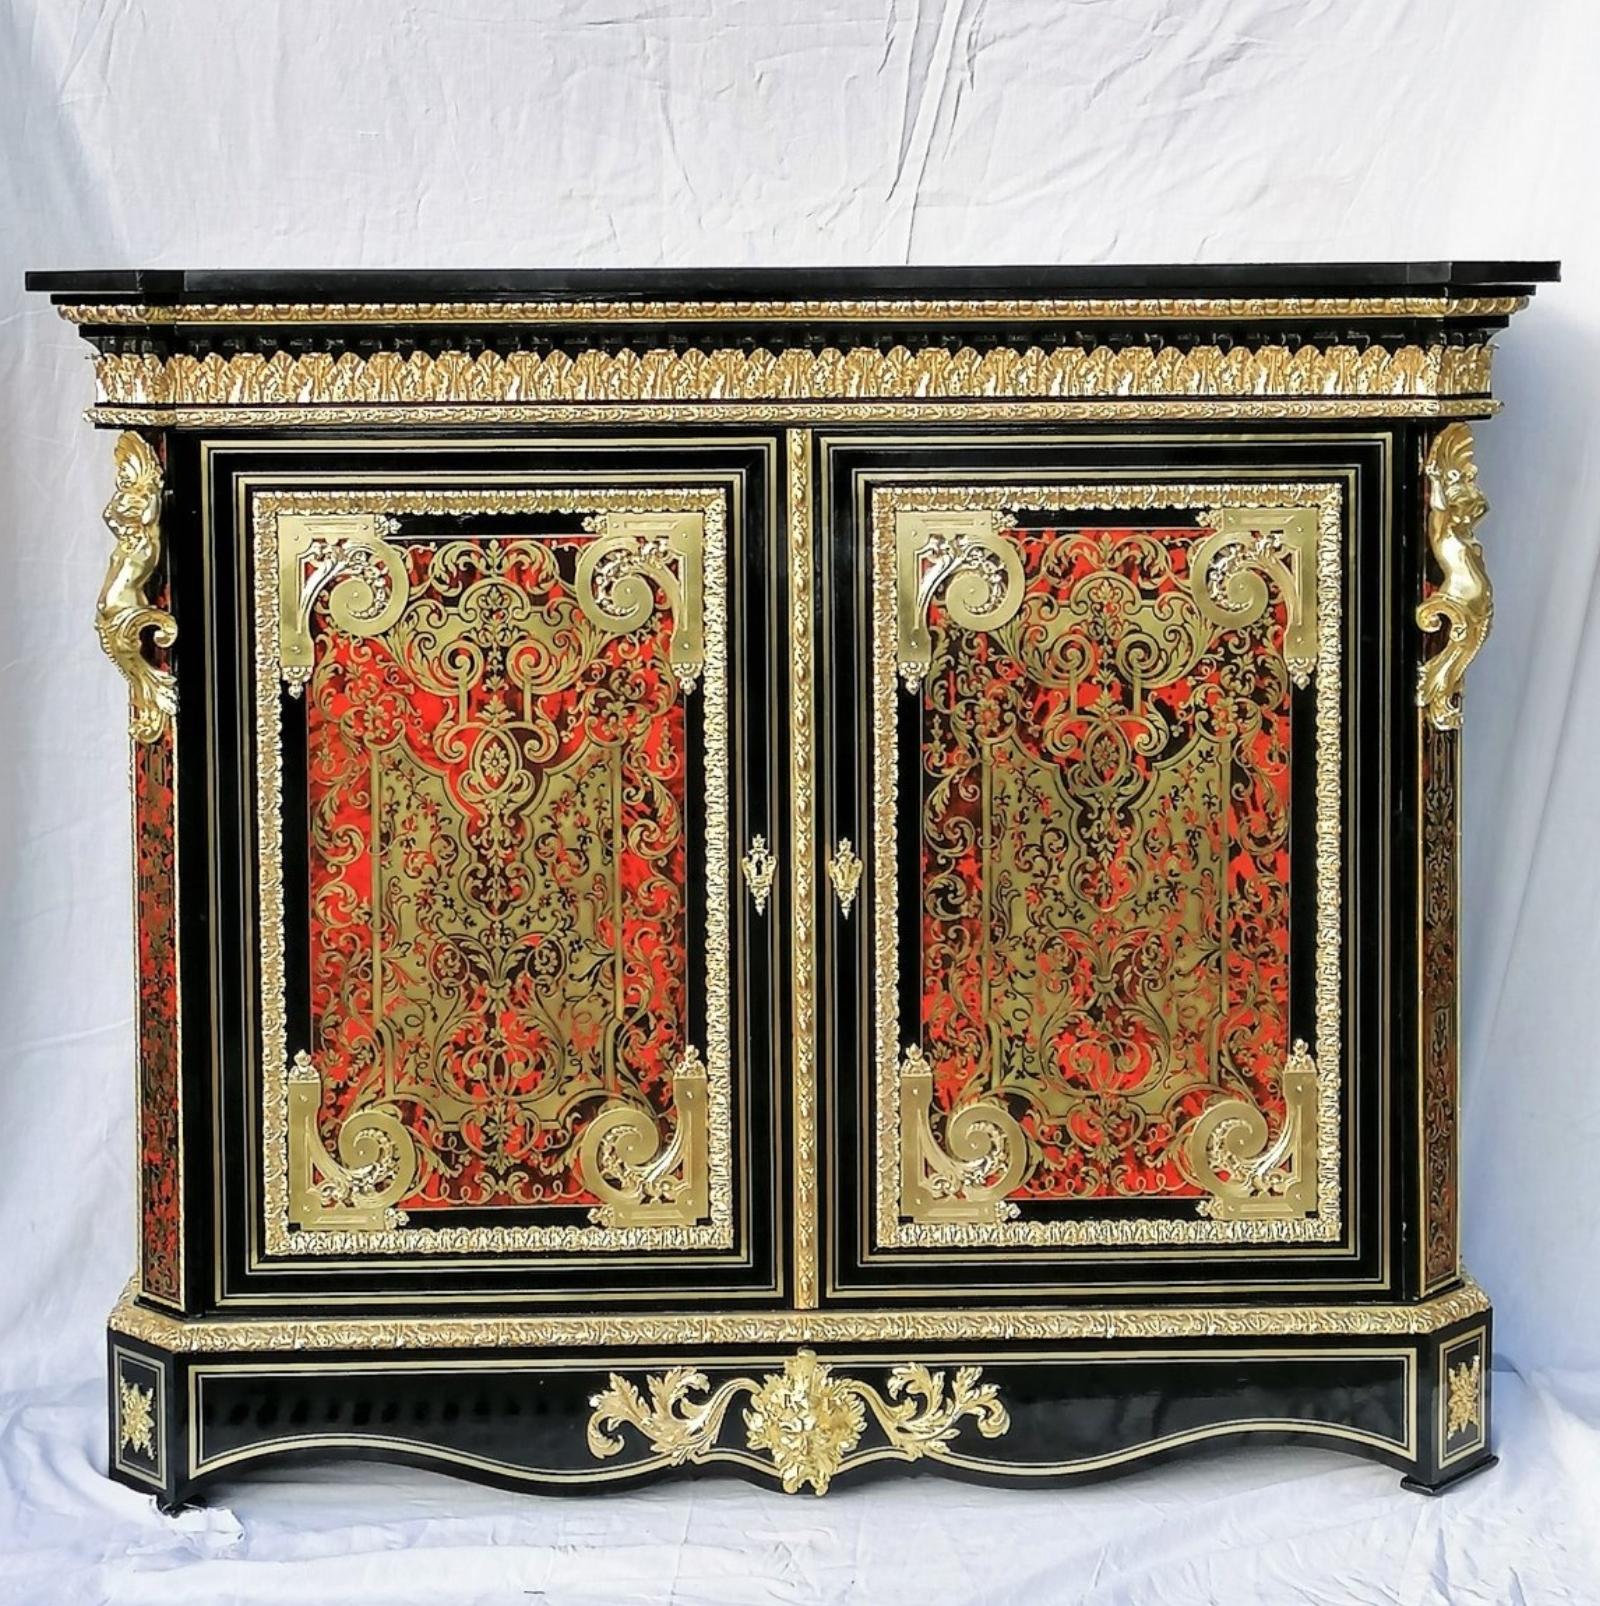 Signed rarity, credenza buffet cabinet with 2 doors in Boulle style marquetry by one of the best Parisian bronze cabinetmakers the famous Hyppolite Edme-Pretot, France, 1812-1855.
Opening by 2 Louis XIV style doors, in Boulle style marquetry with